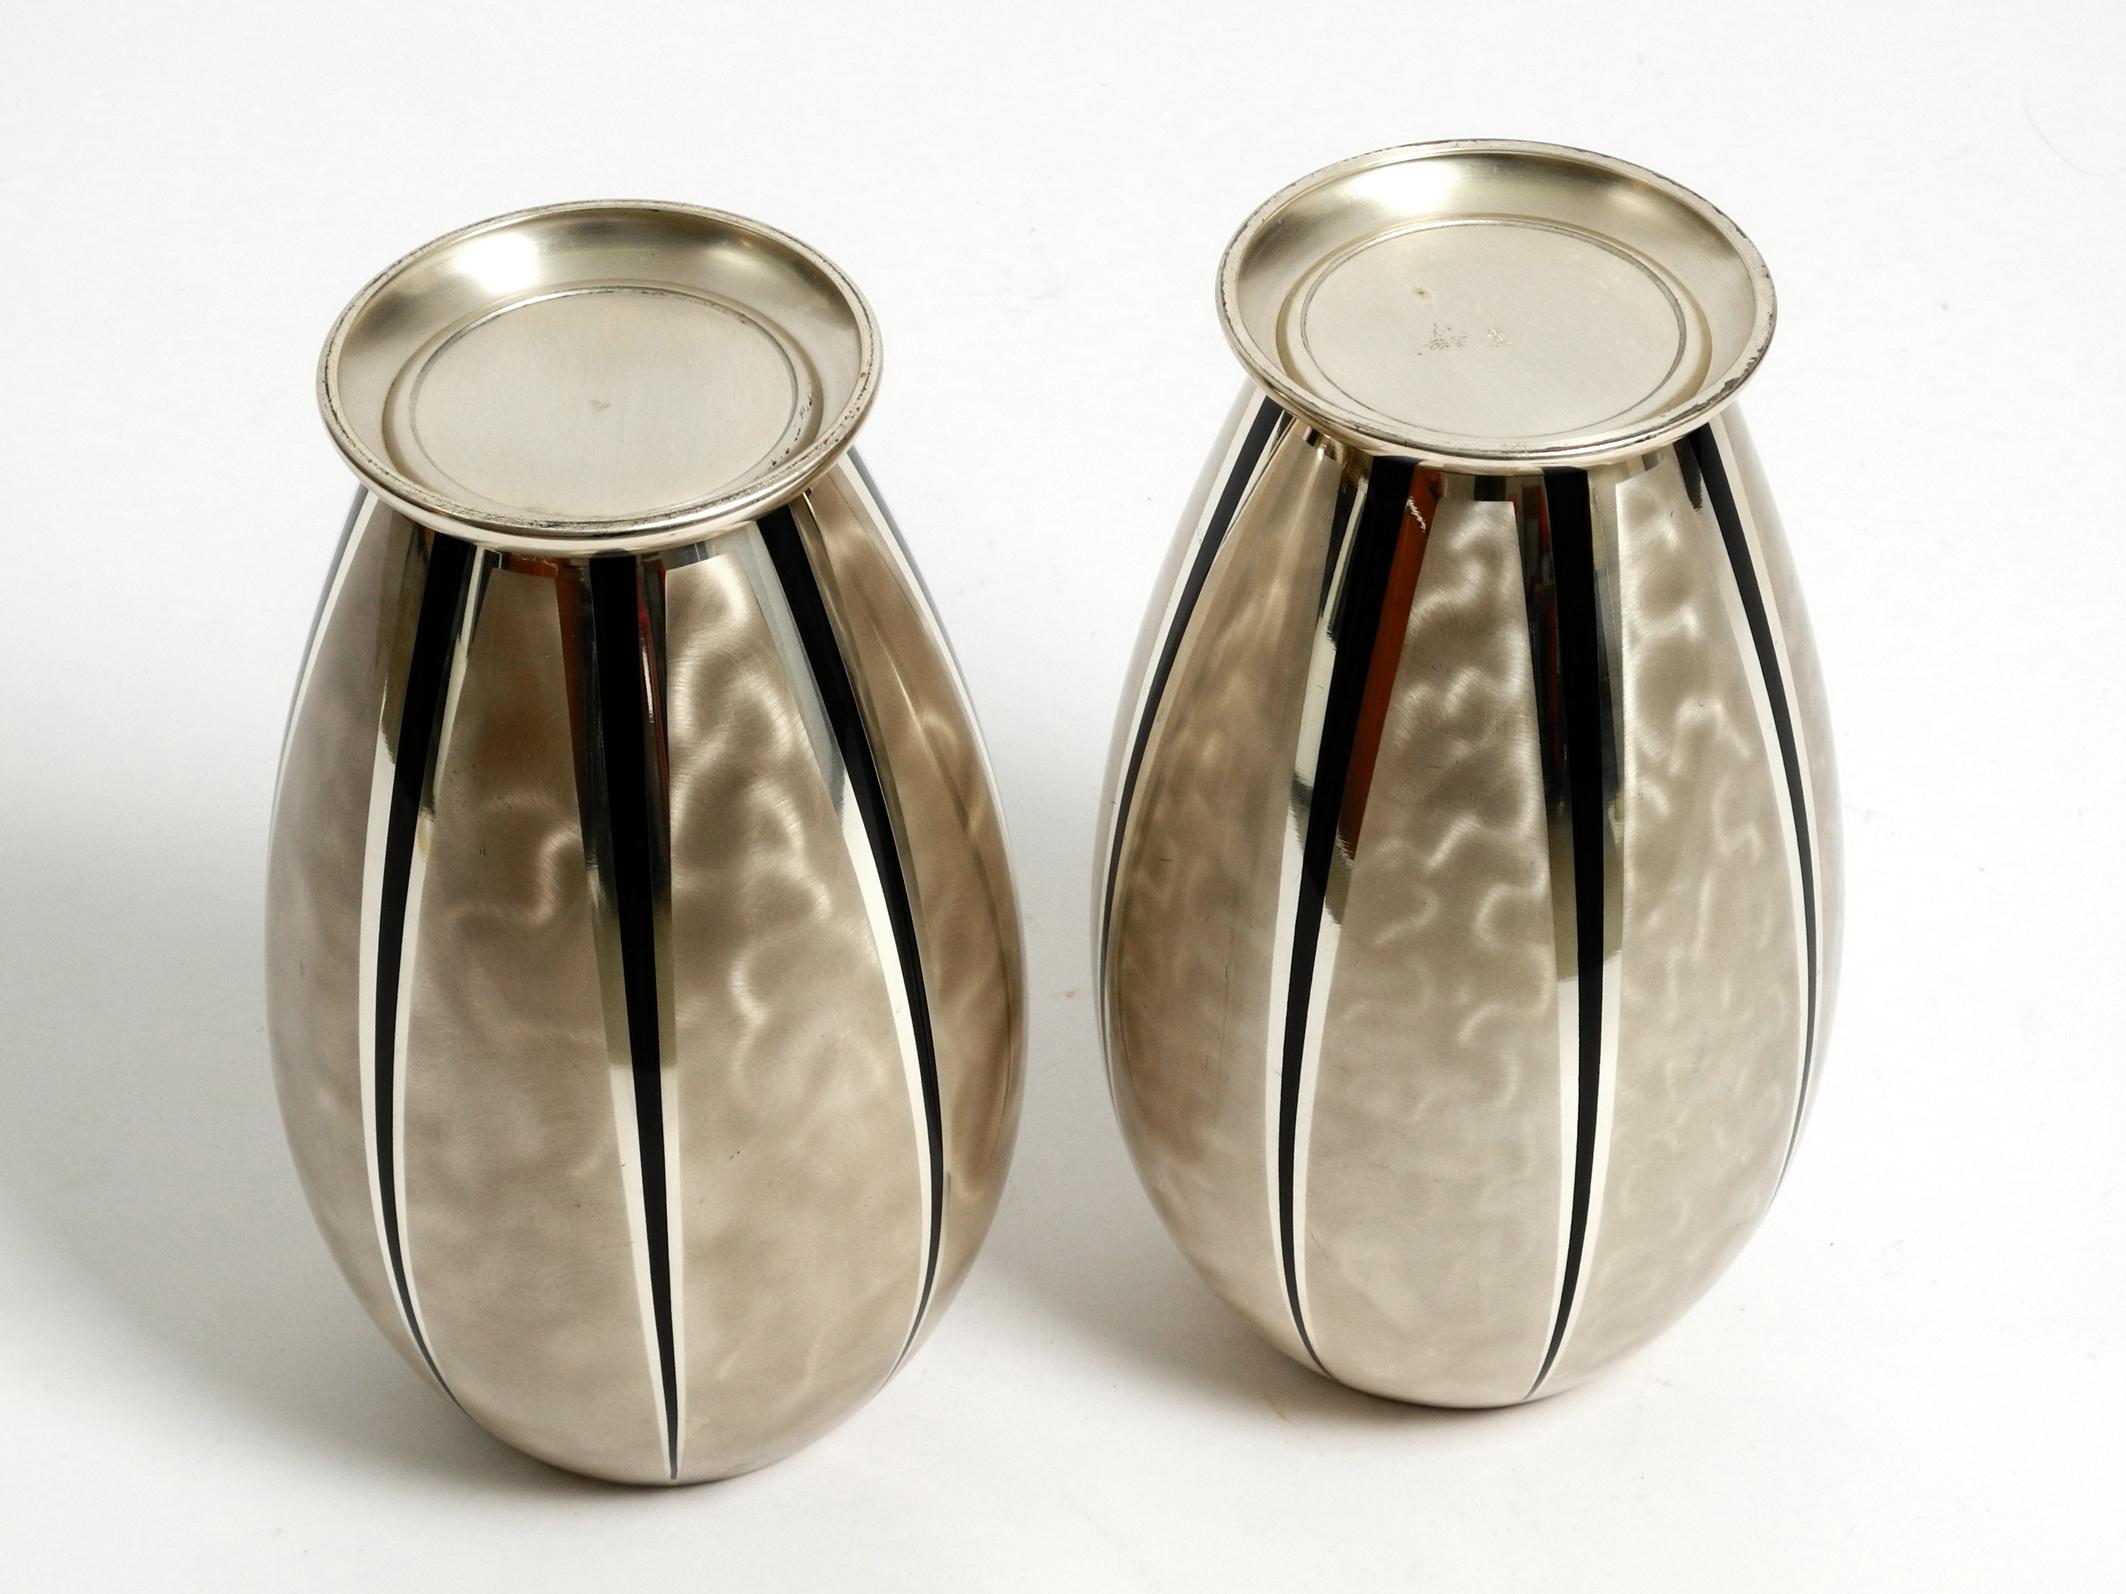 Pair of Mid Century Modern WMF Ikora table vases made of silver-plated brass 4